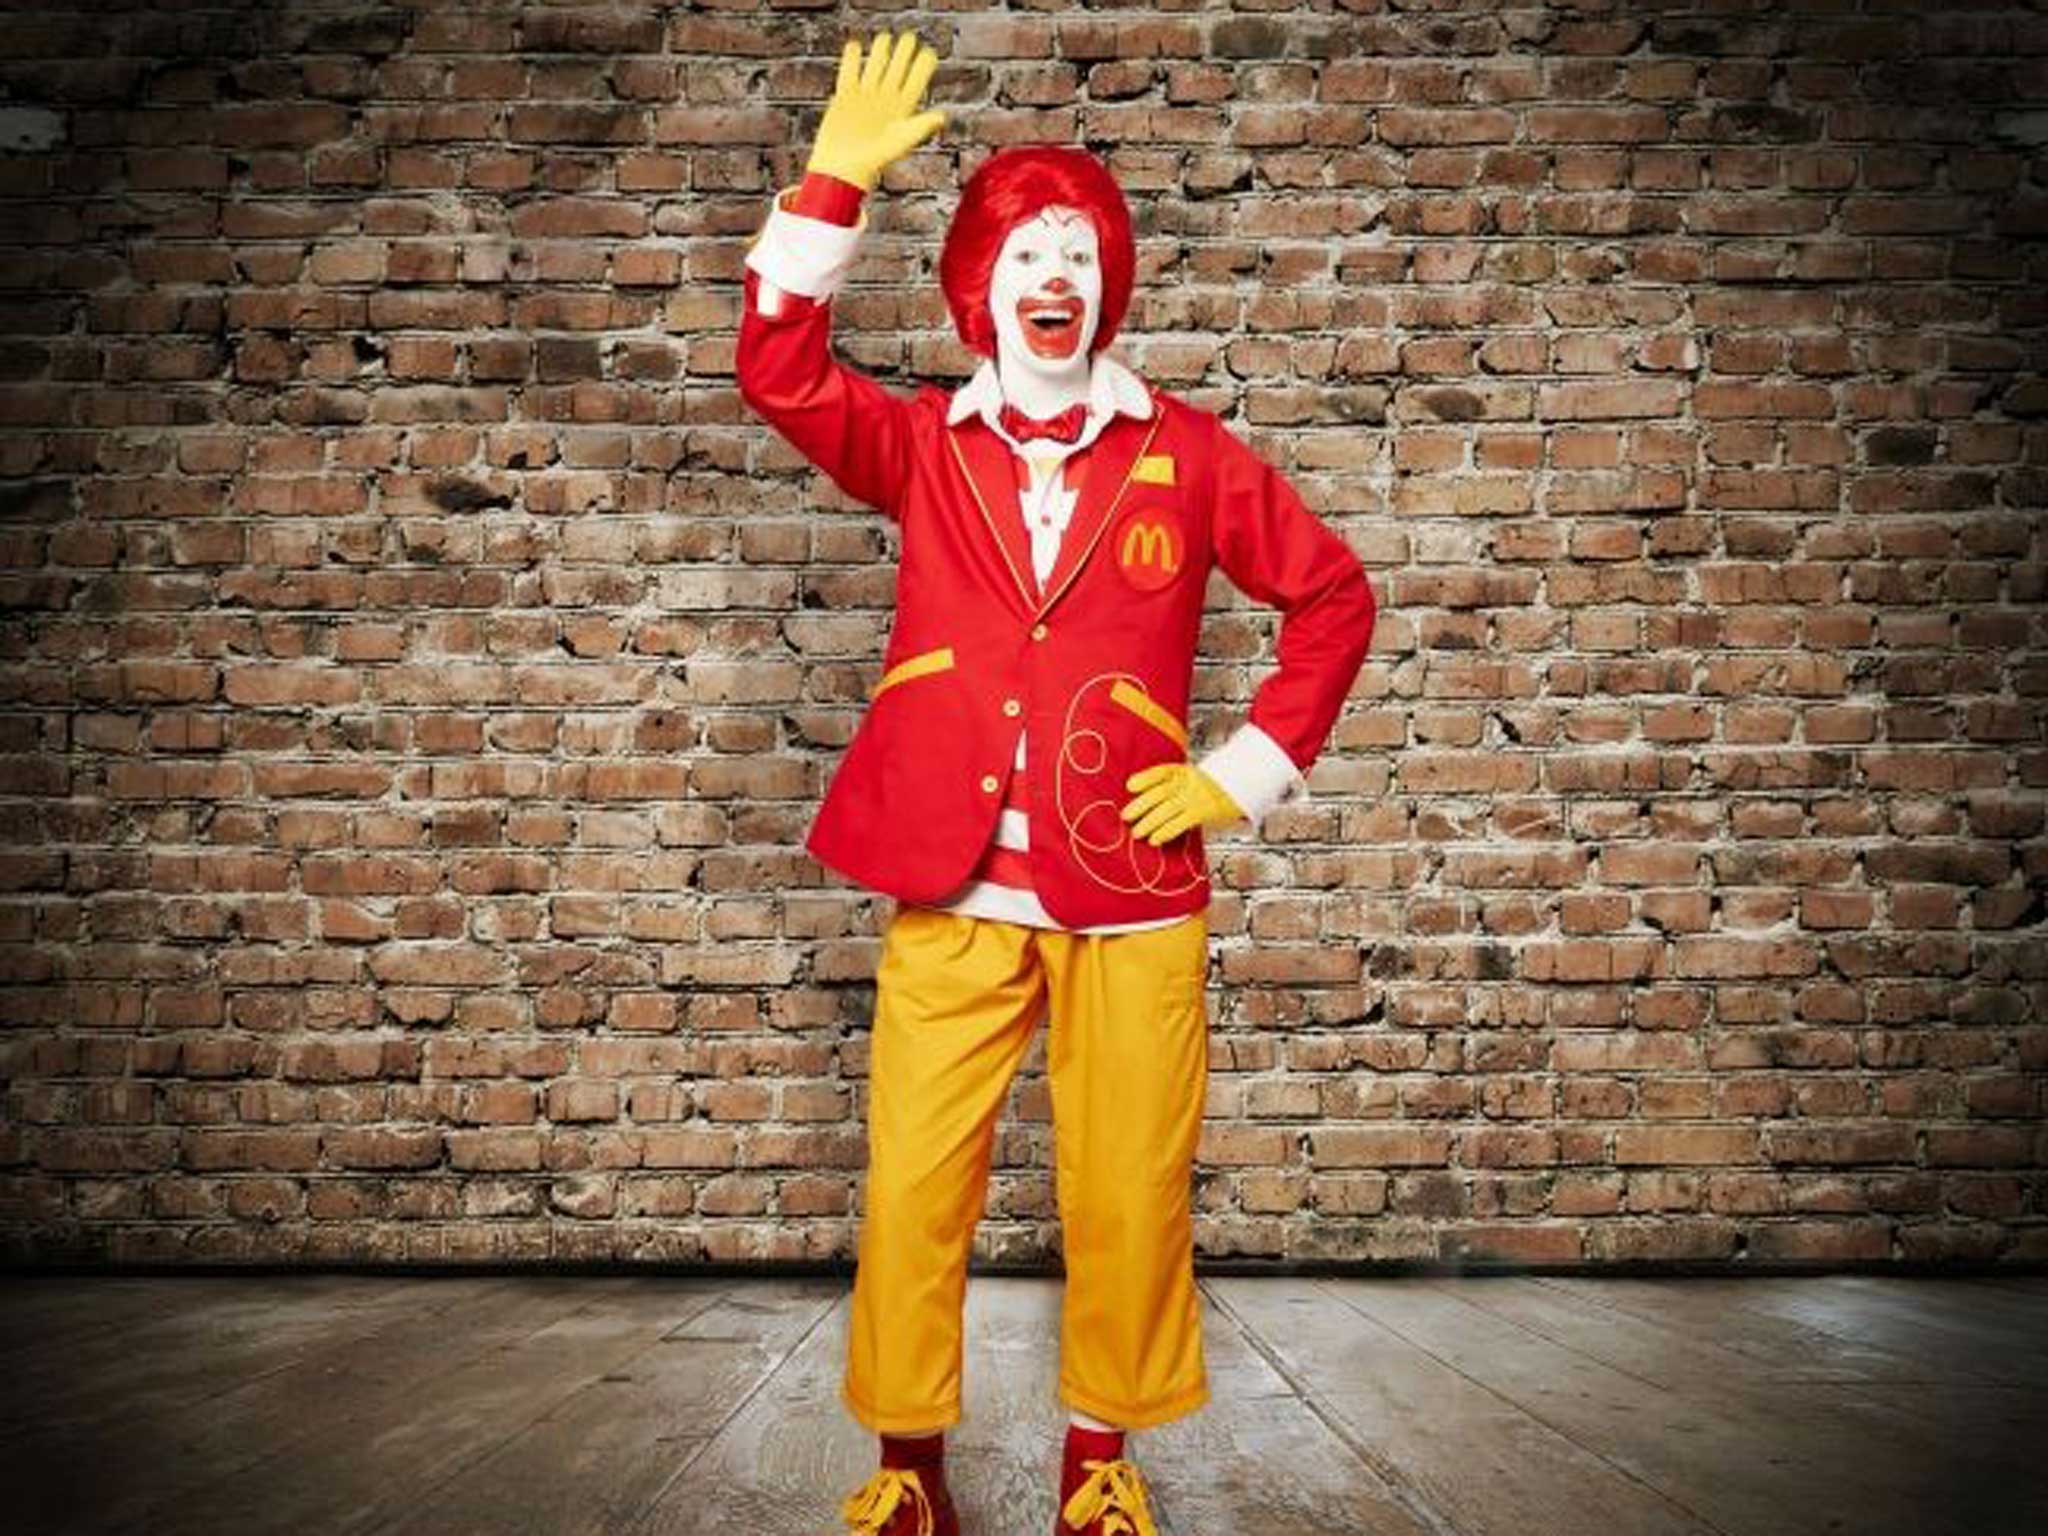 Ronald McDonald hasn't been kidnapping children, even though he does look the type